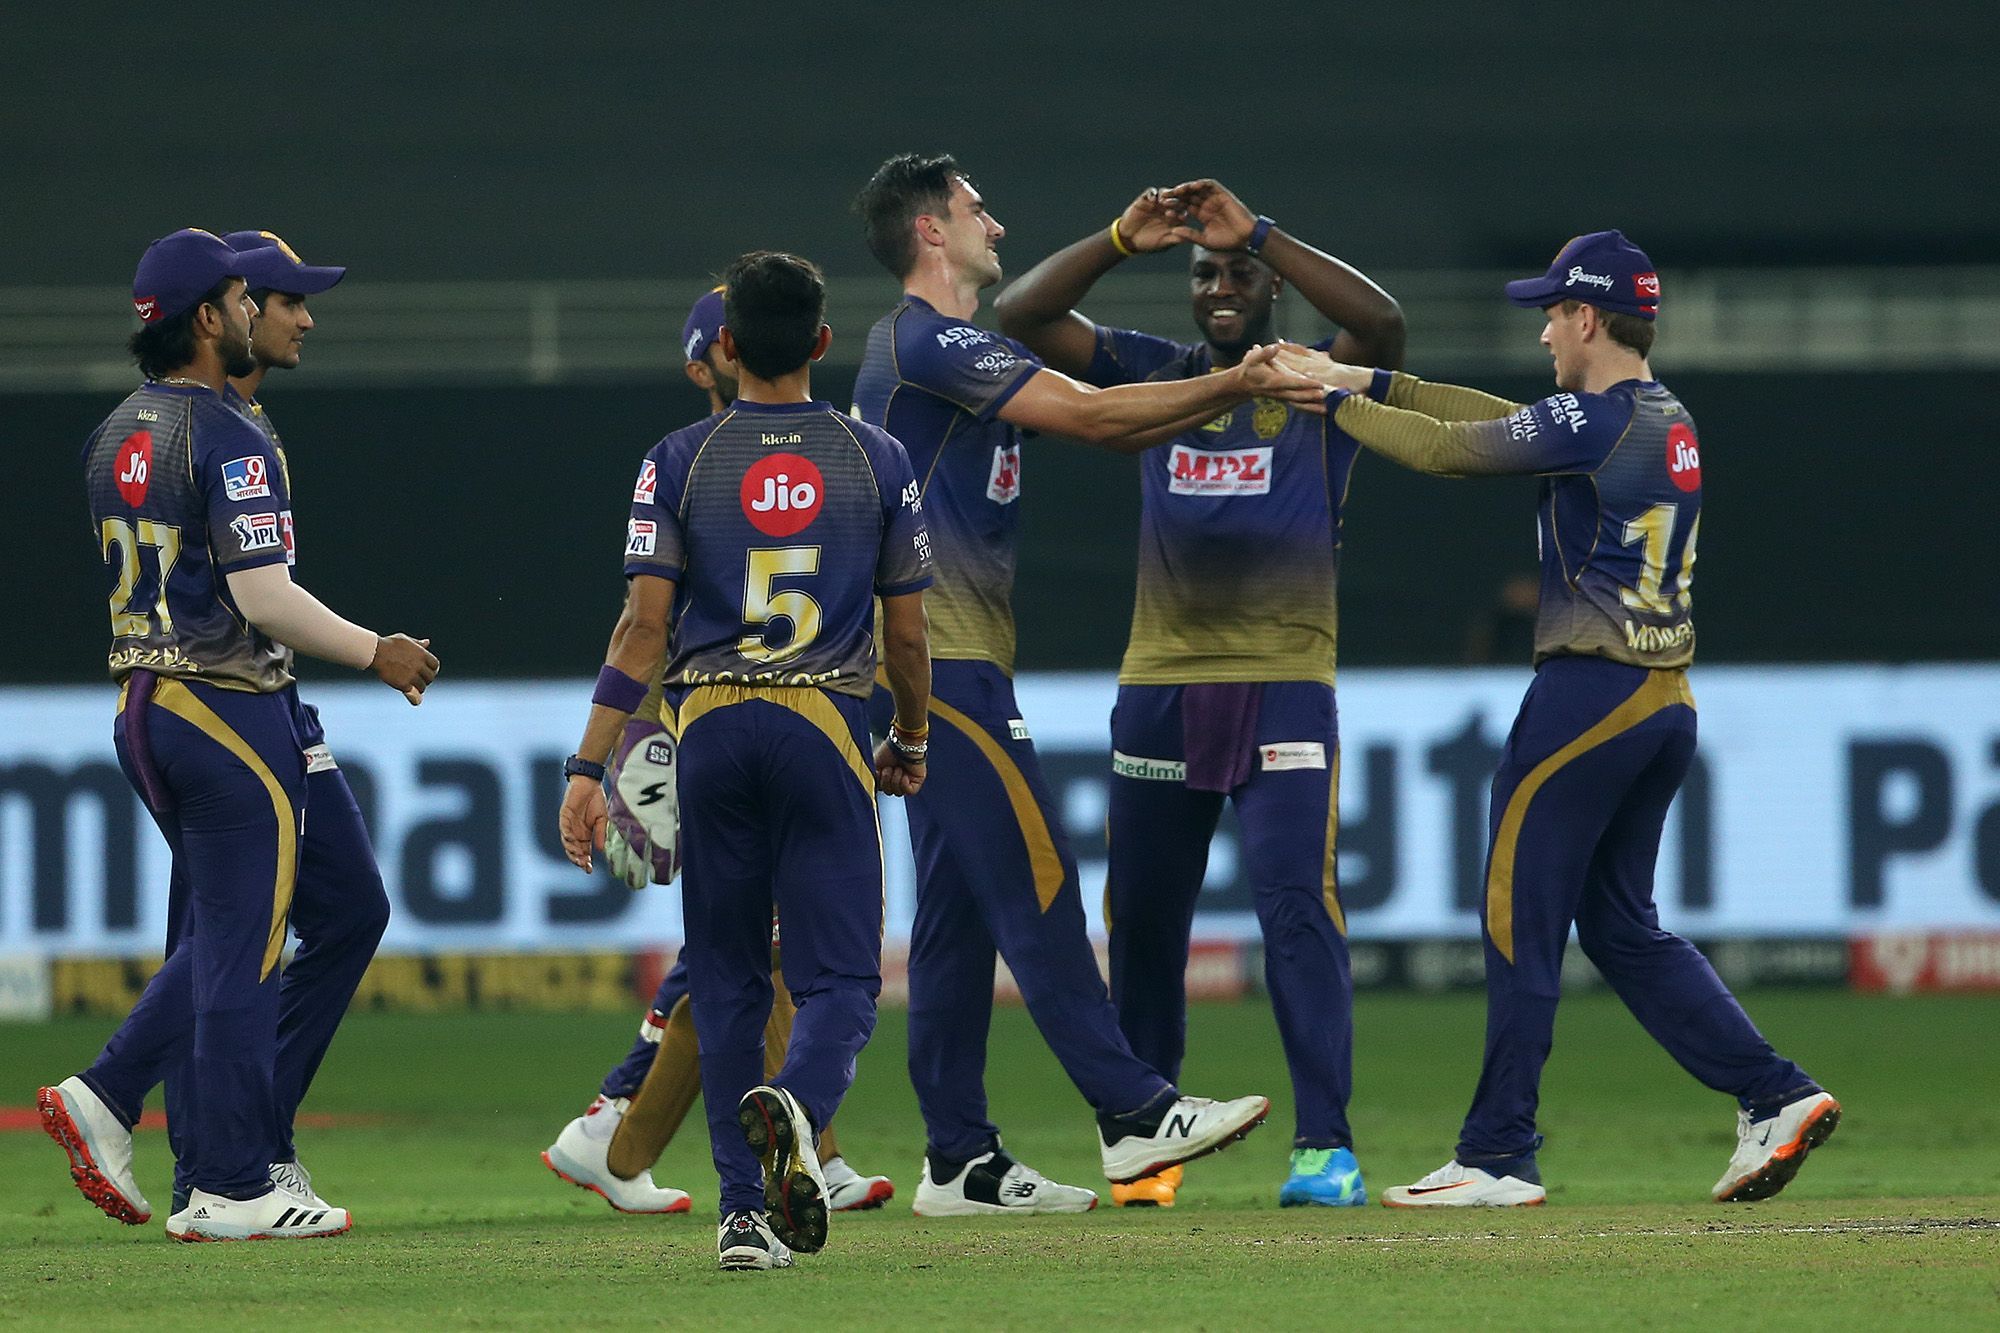 Chuck, Marry and Frill | Who KKR should let go and retain ahead of IPL 2021